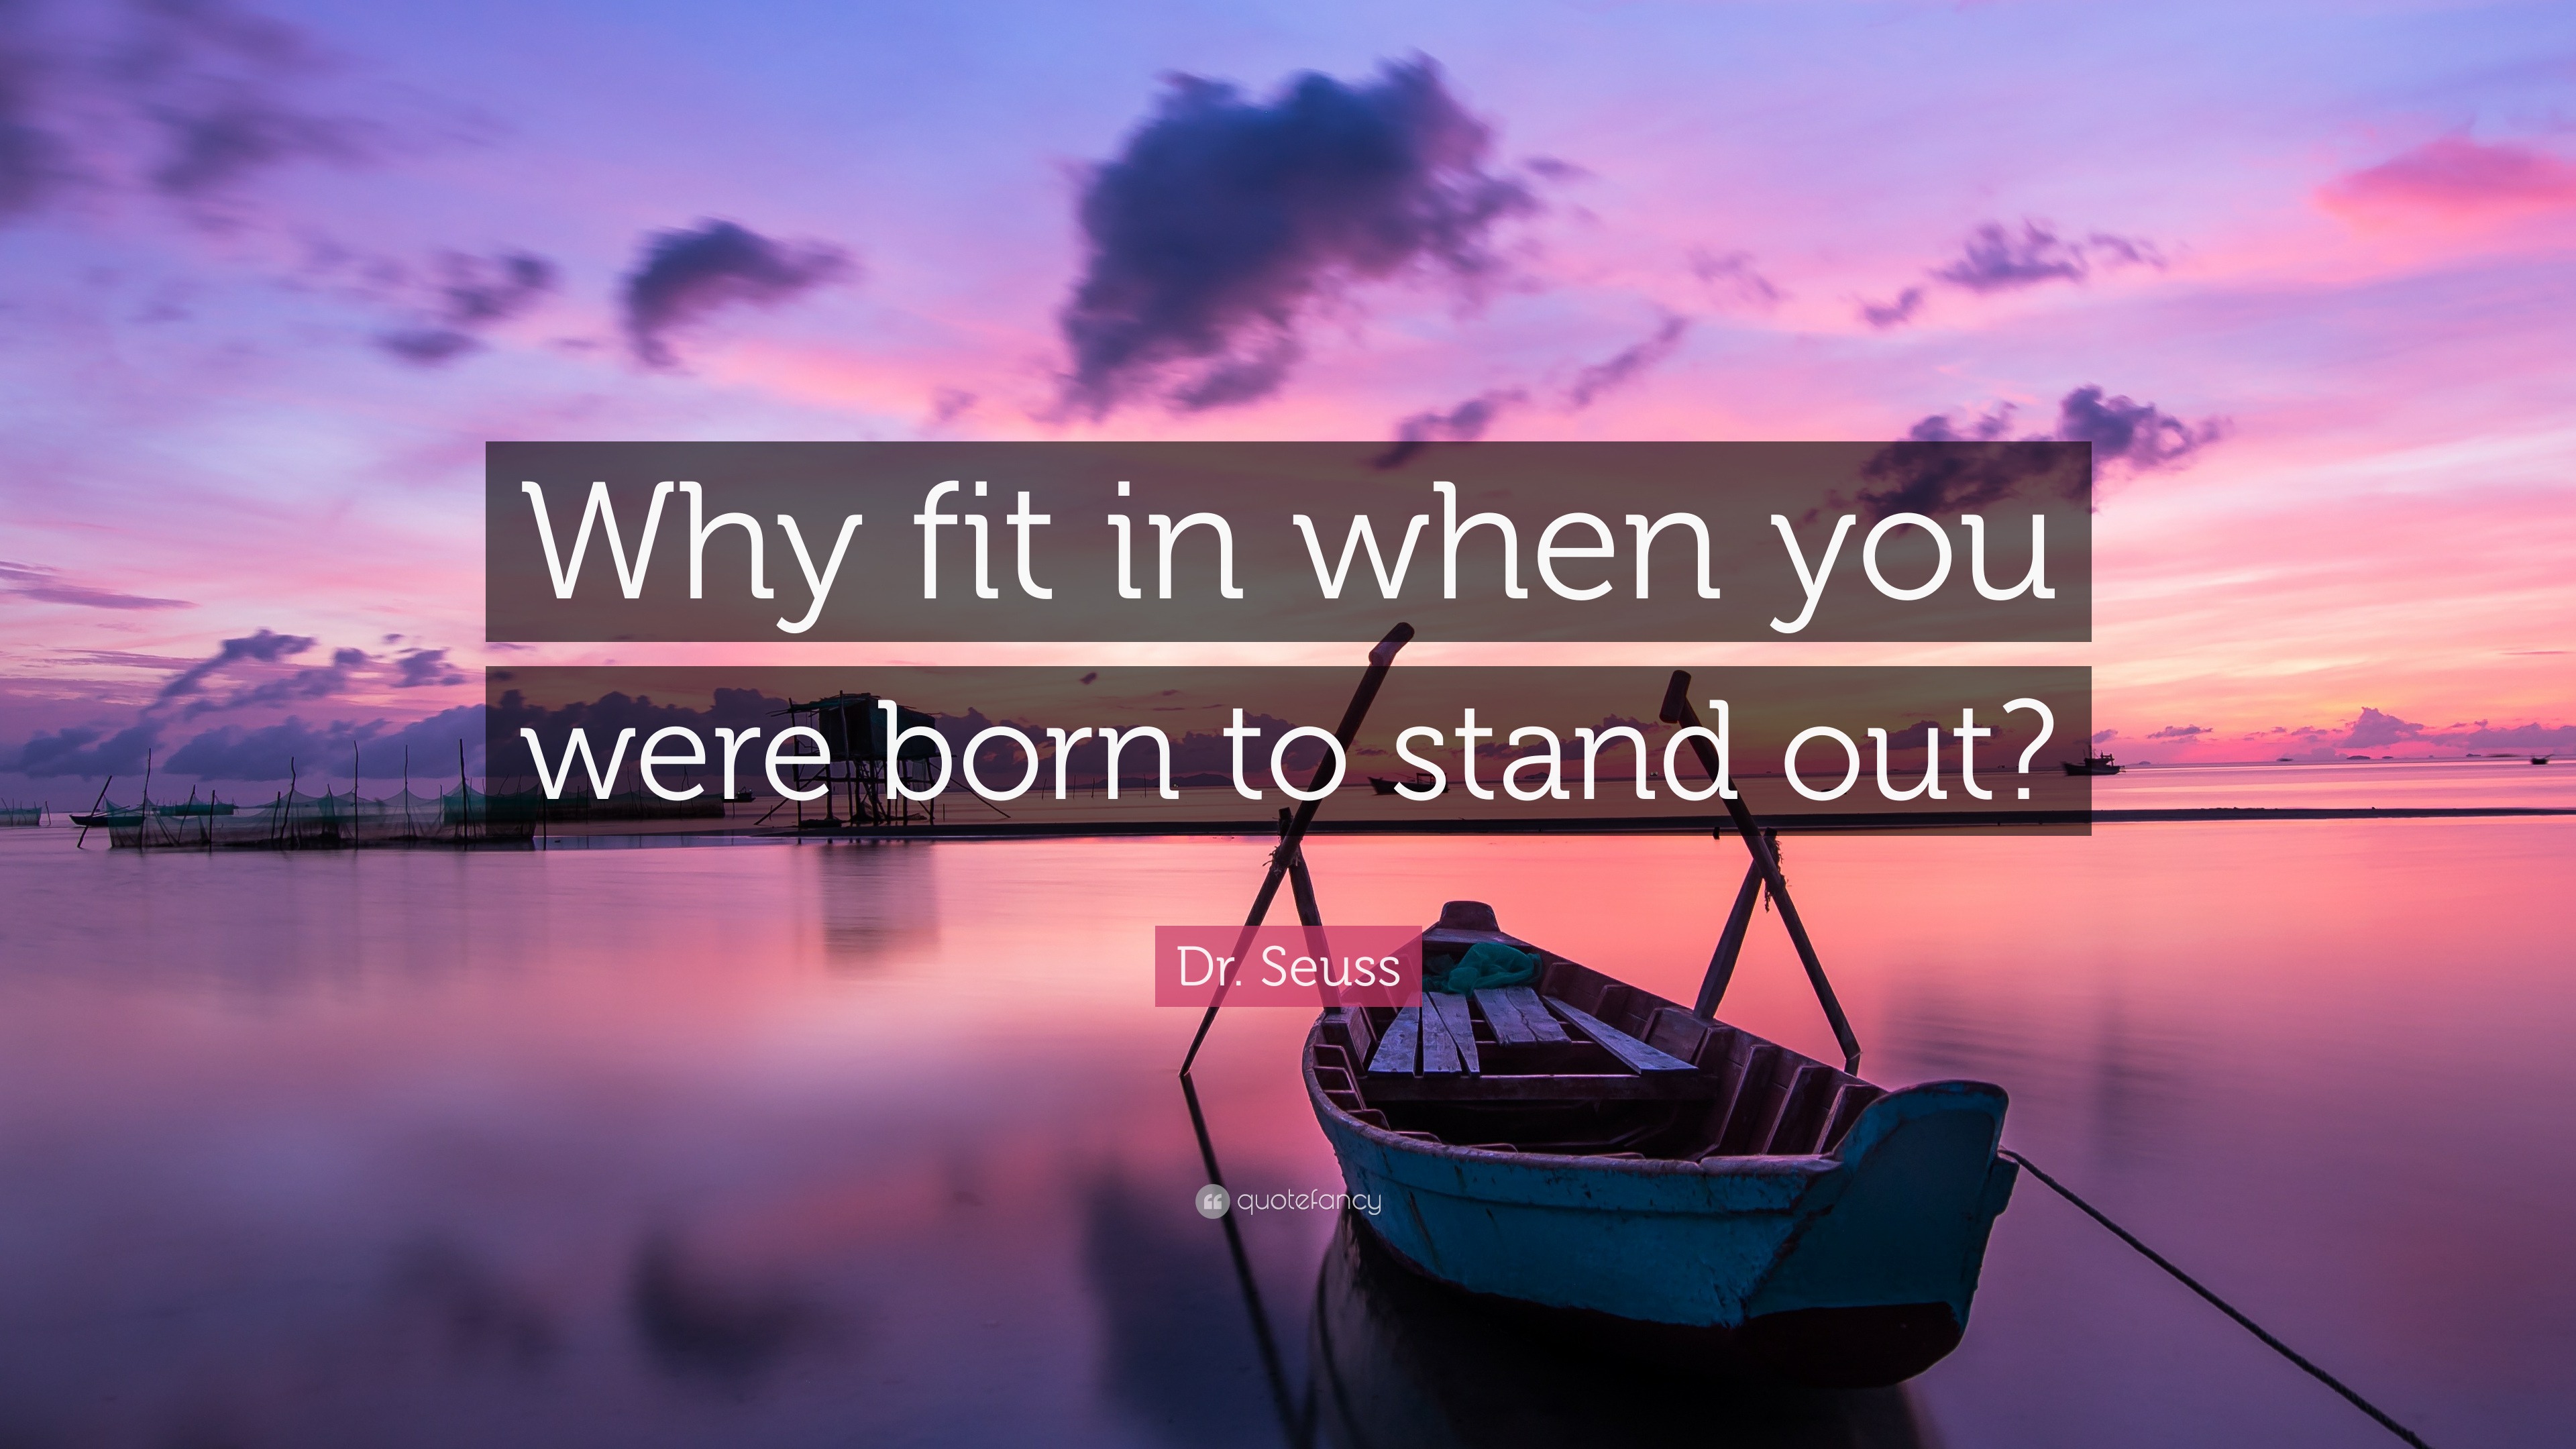 Dr. Seuss Quote: "Why fit in when you were born to stand out?" (13 wallpapers) - Quotefancy